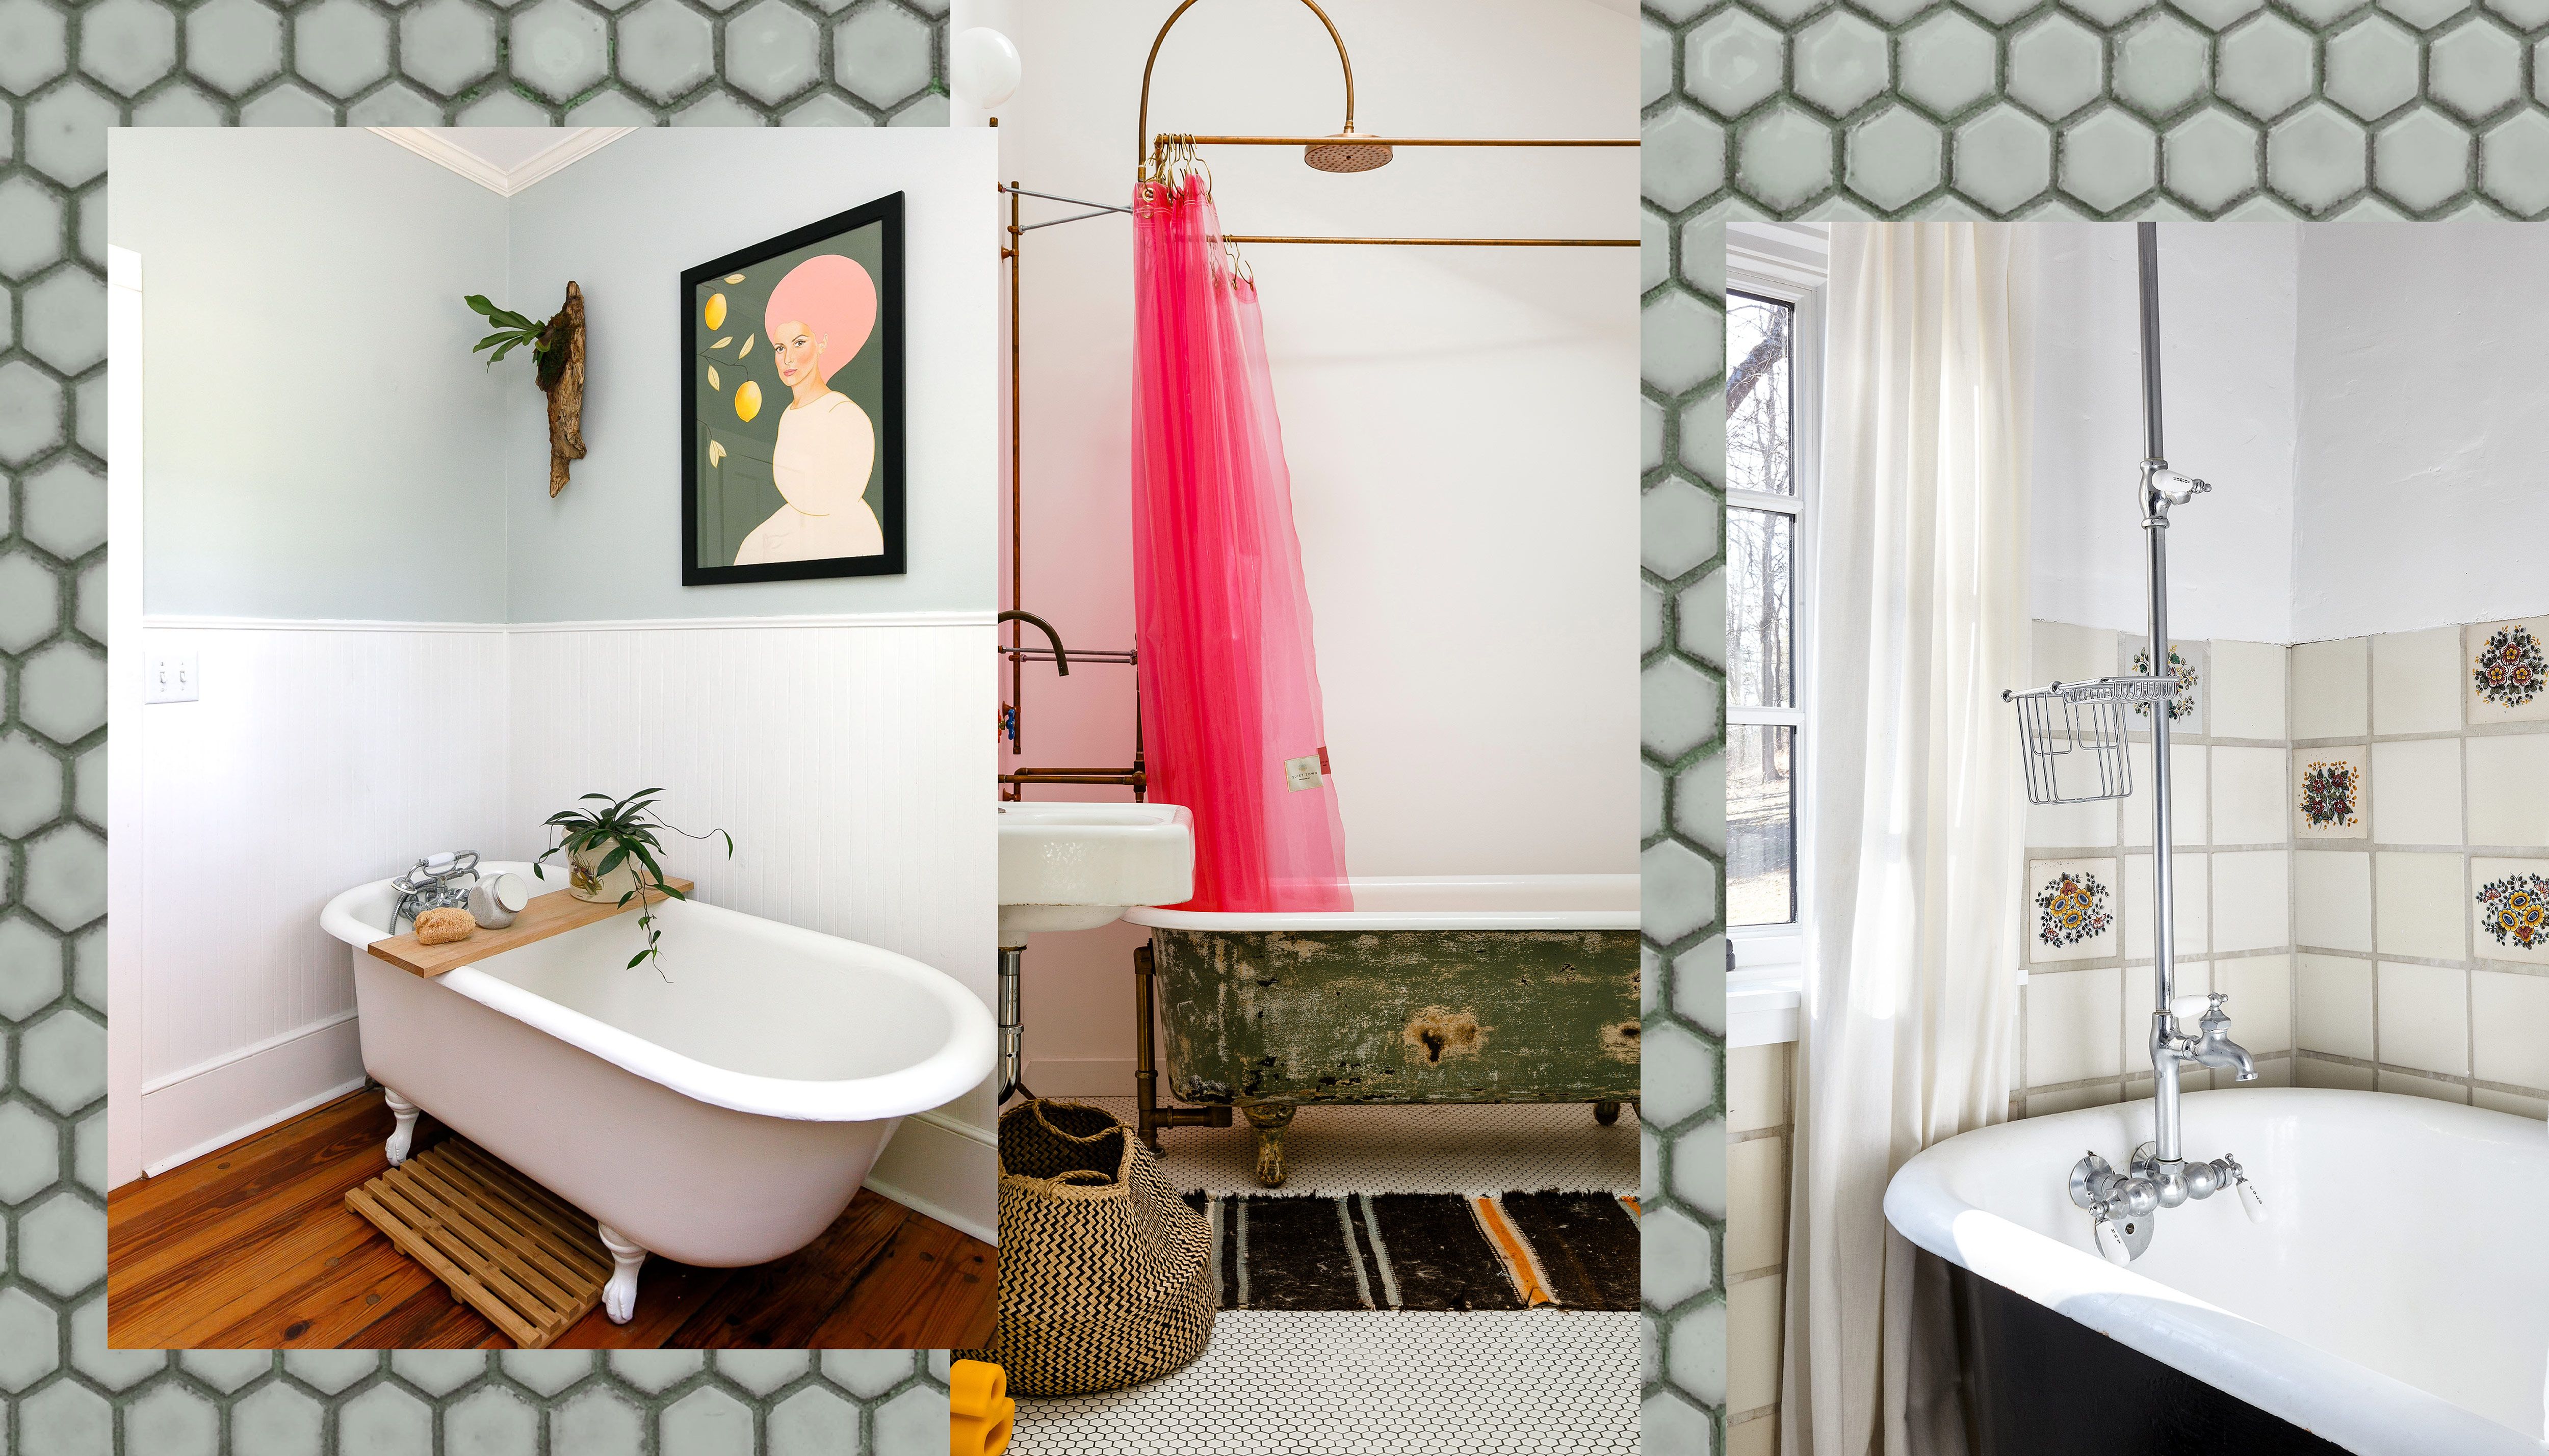 How to Buy a Soaker Tub for a Tiny Bathroom